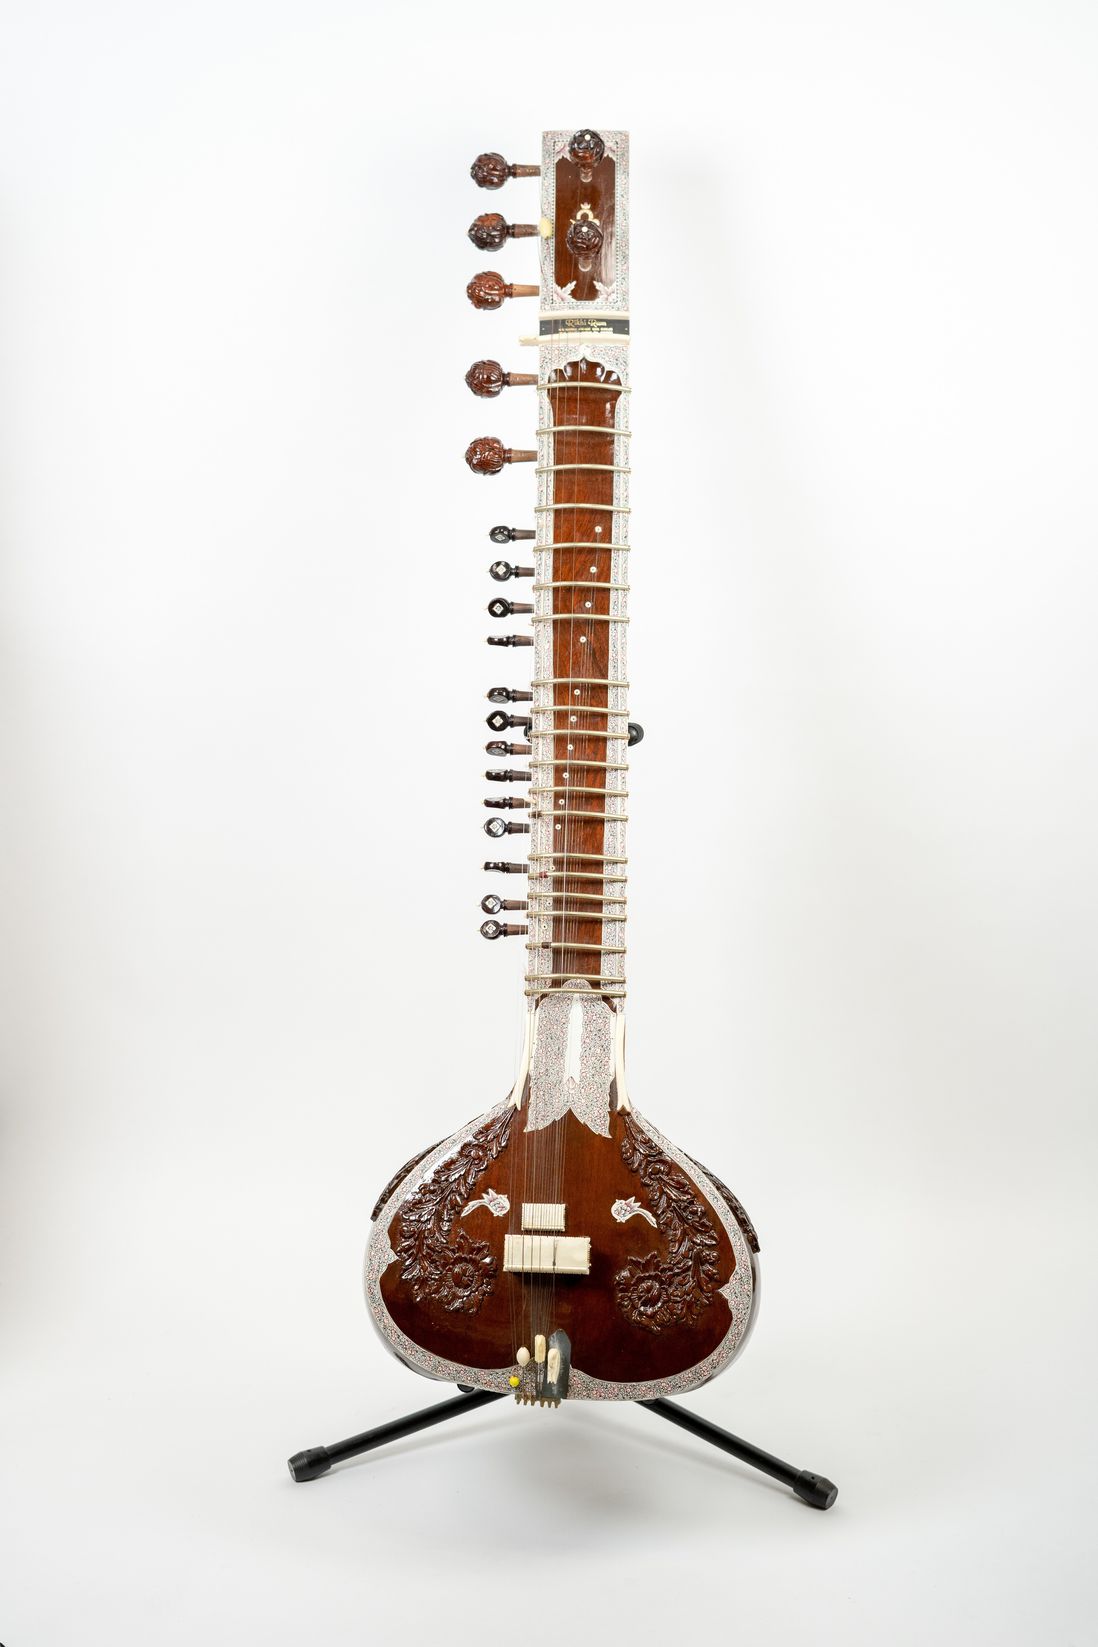 Ravi Shankar owned and played this sitar, and gave it to Mercury Records executive Shelby Singleton as a gift on a trip to America in the early 60s.